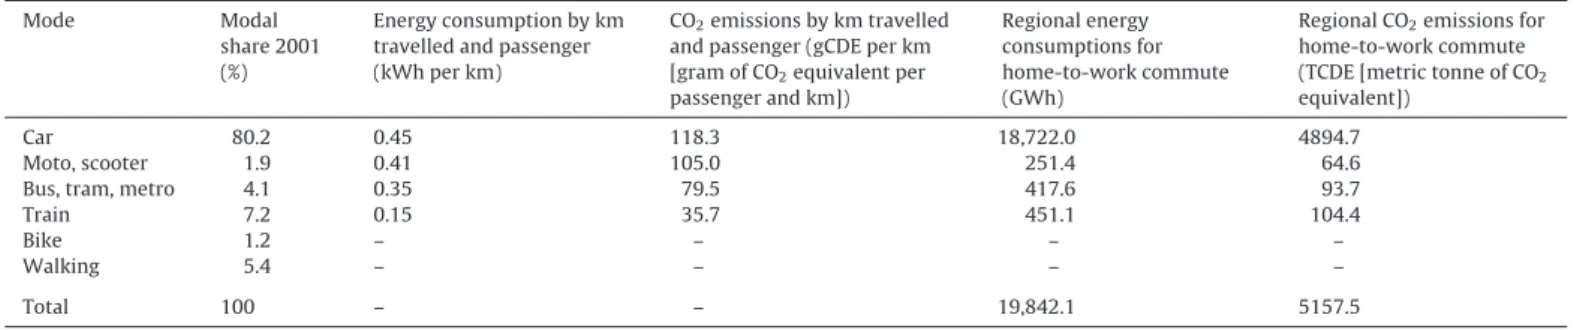 Table 1 also provides regional energy consumption and CO 2 emis- emis-sions for home-to-work commuting, considering annual distance travelled and mode choice of all respondents to the survey.